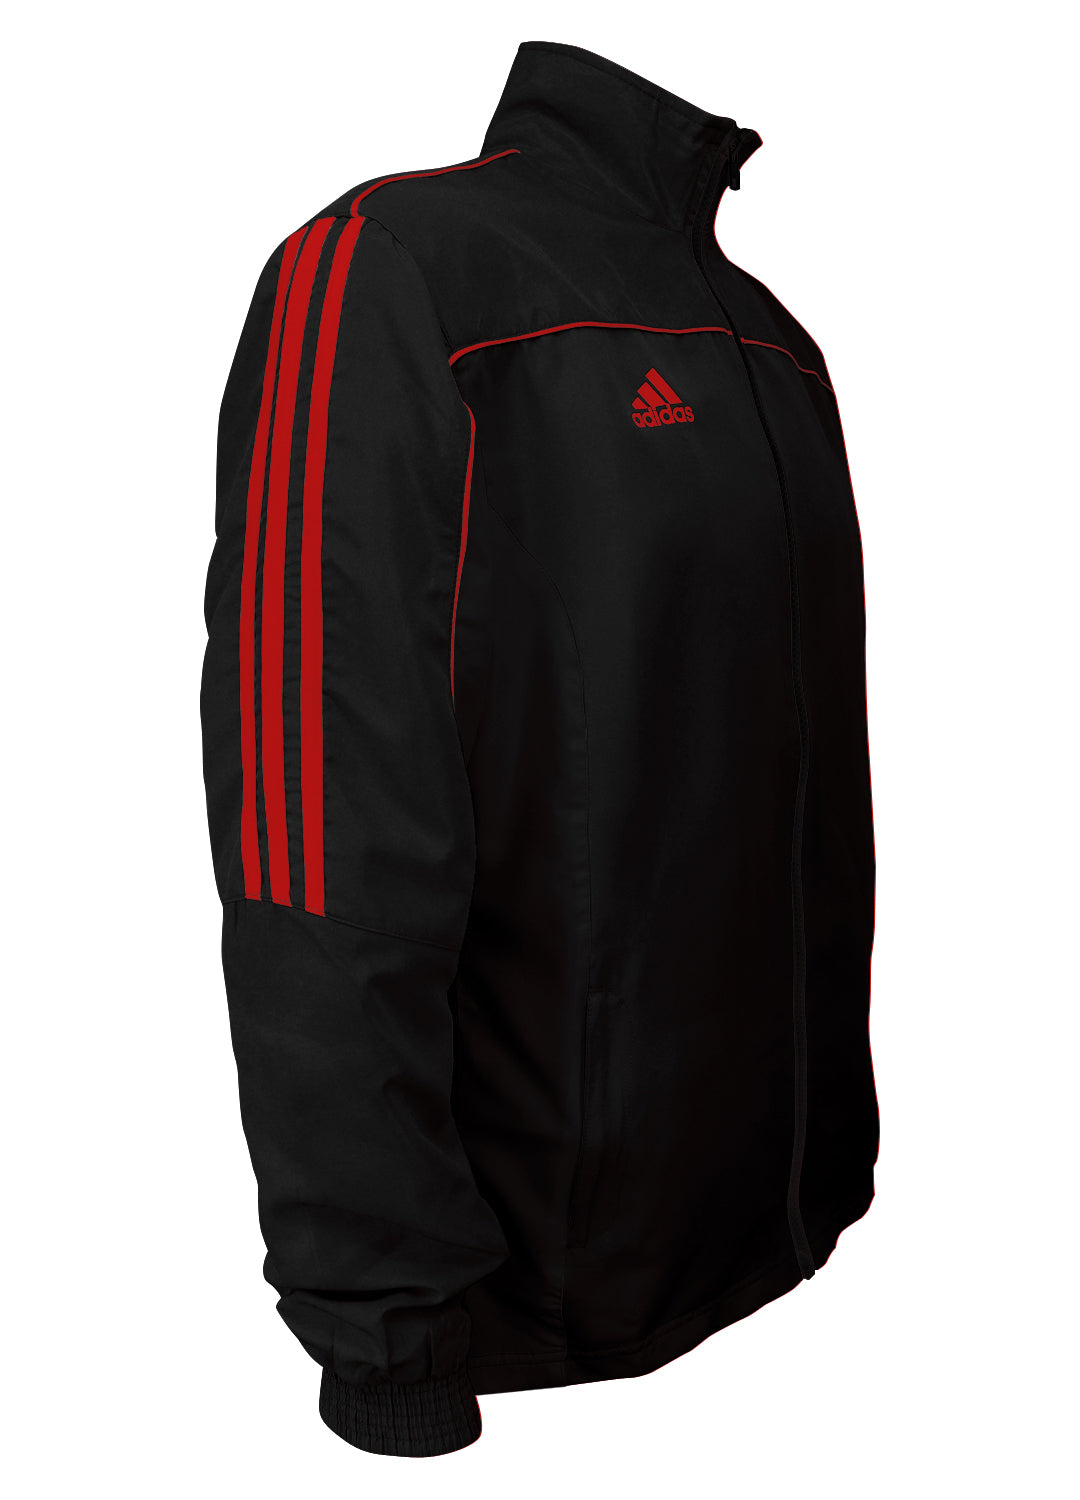 adidas Black with Red Stripes Windbreaker Style Team Jacket Side View